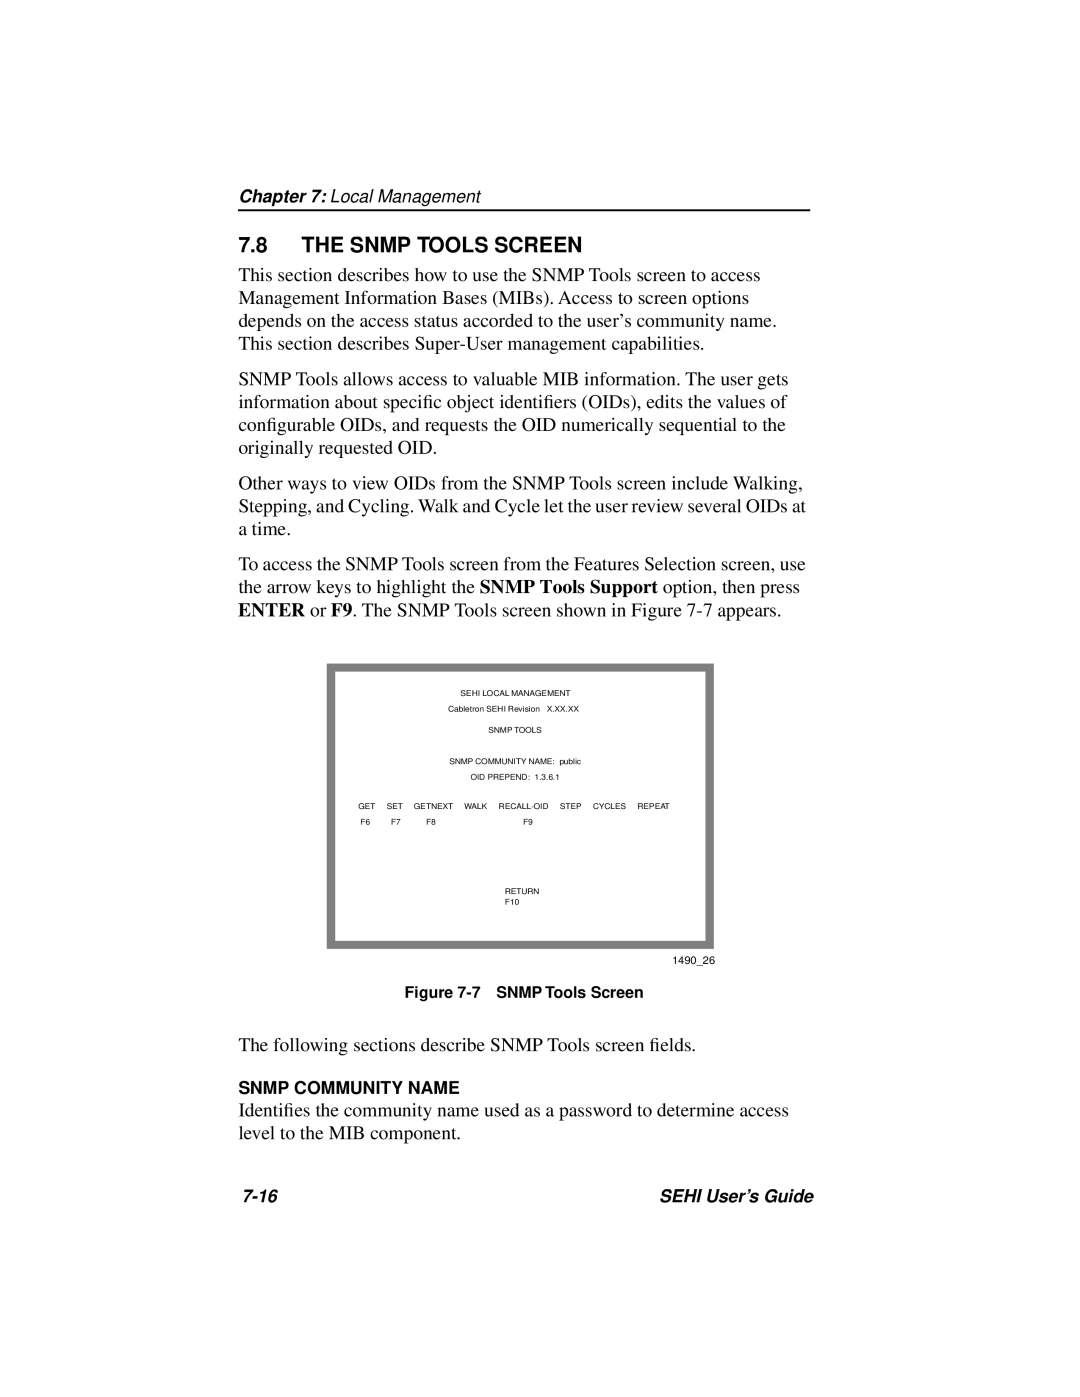 Cabletron Systems SEHI-22FL manual The Snmp Tools Screen 